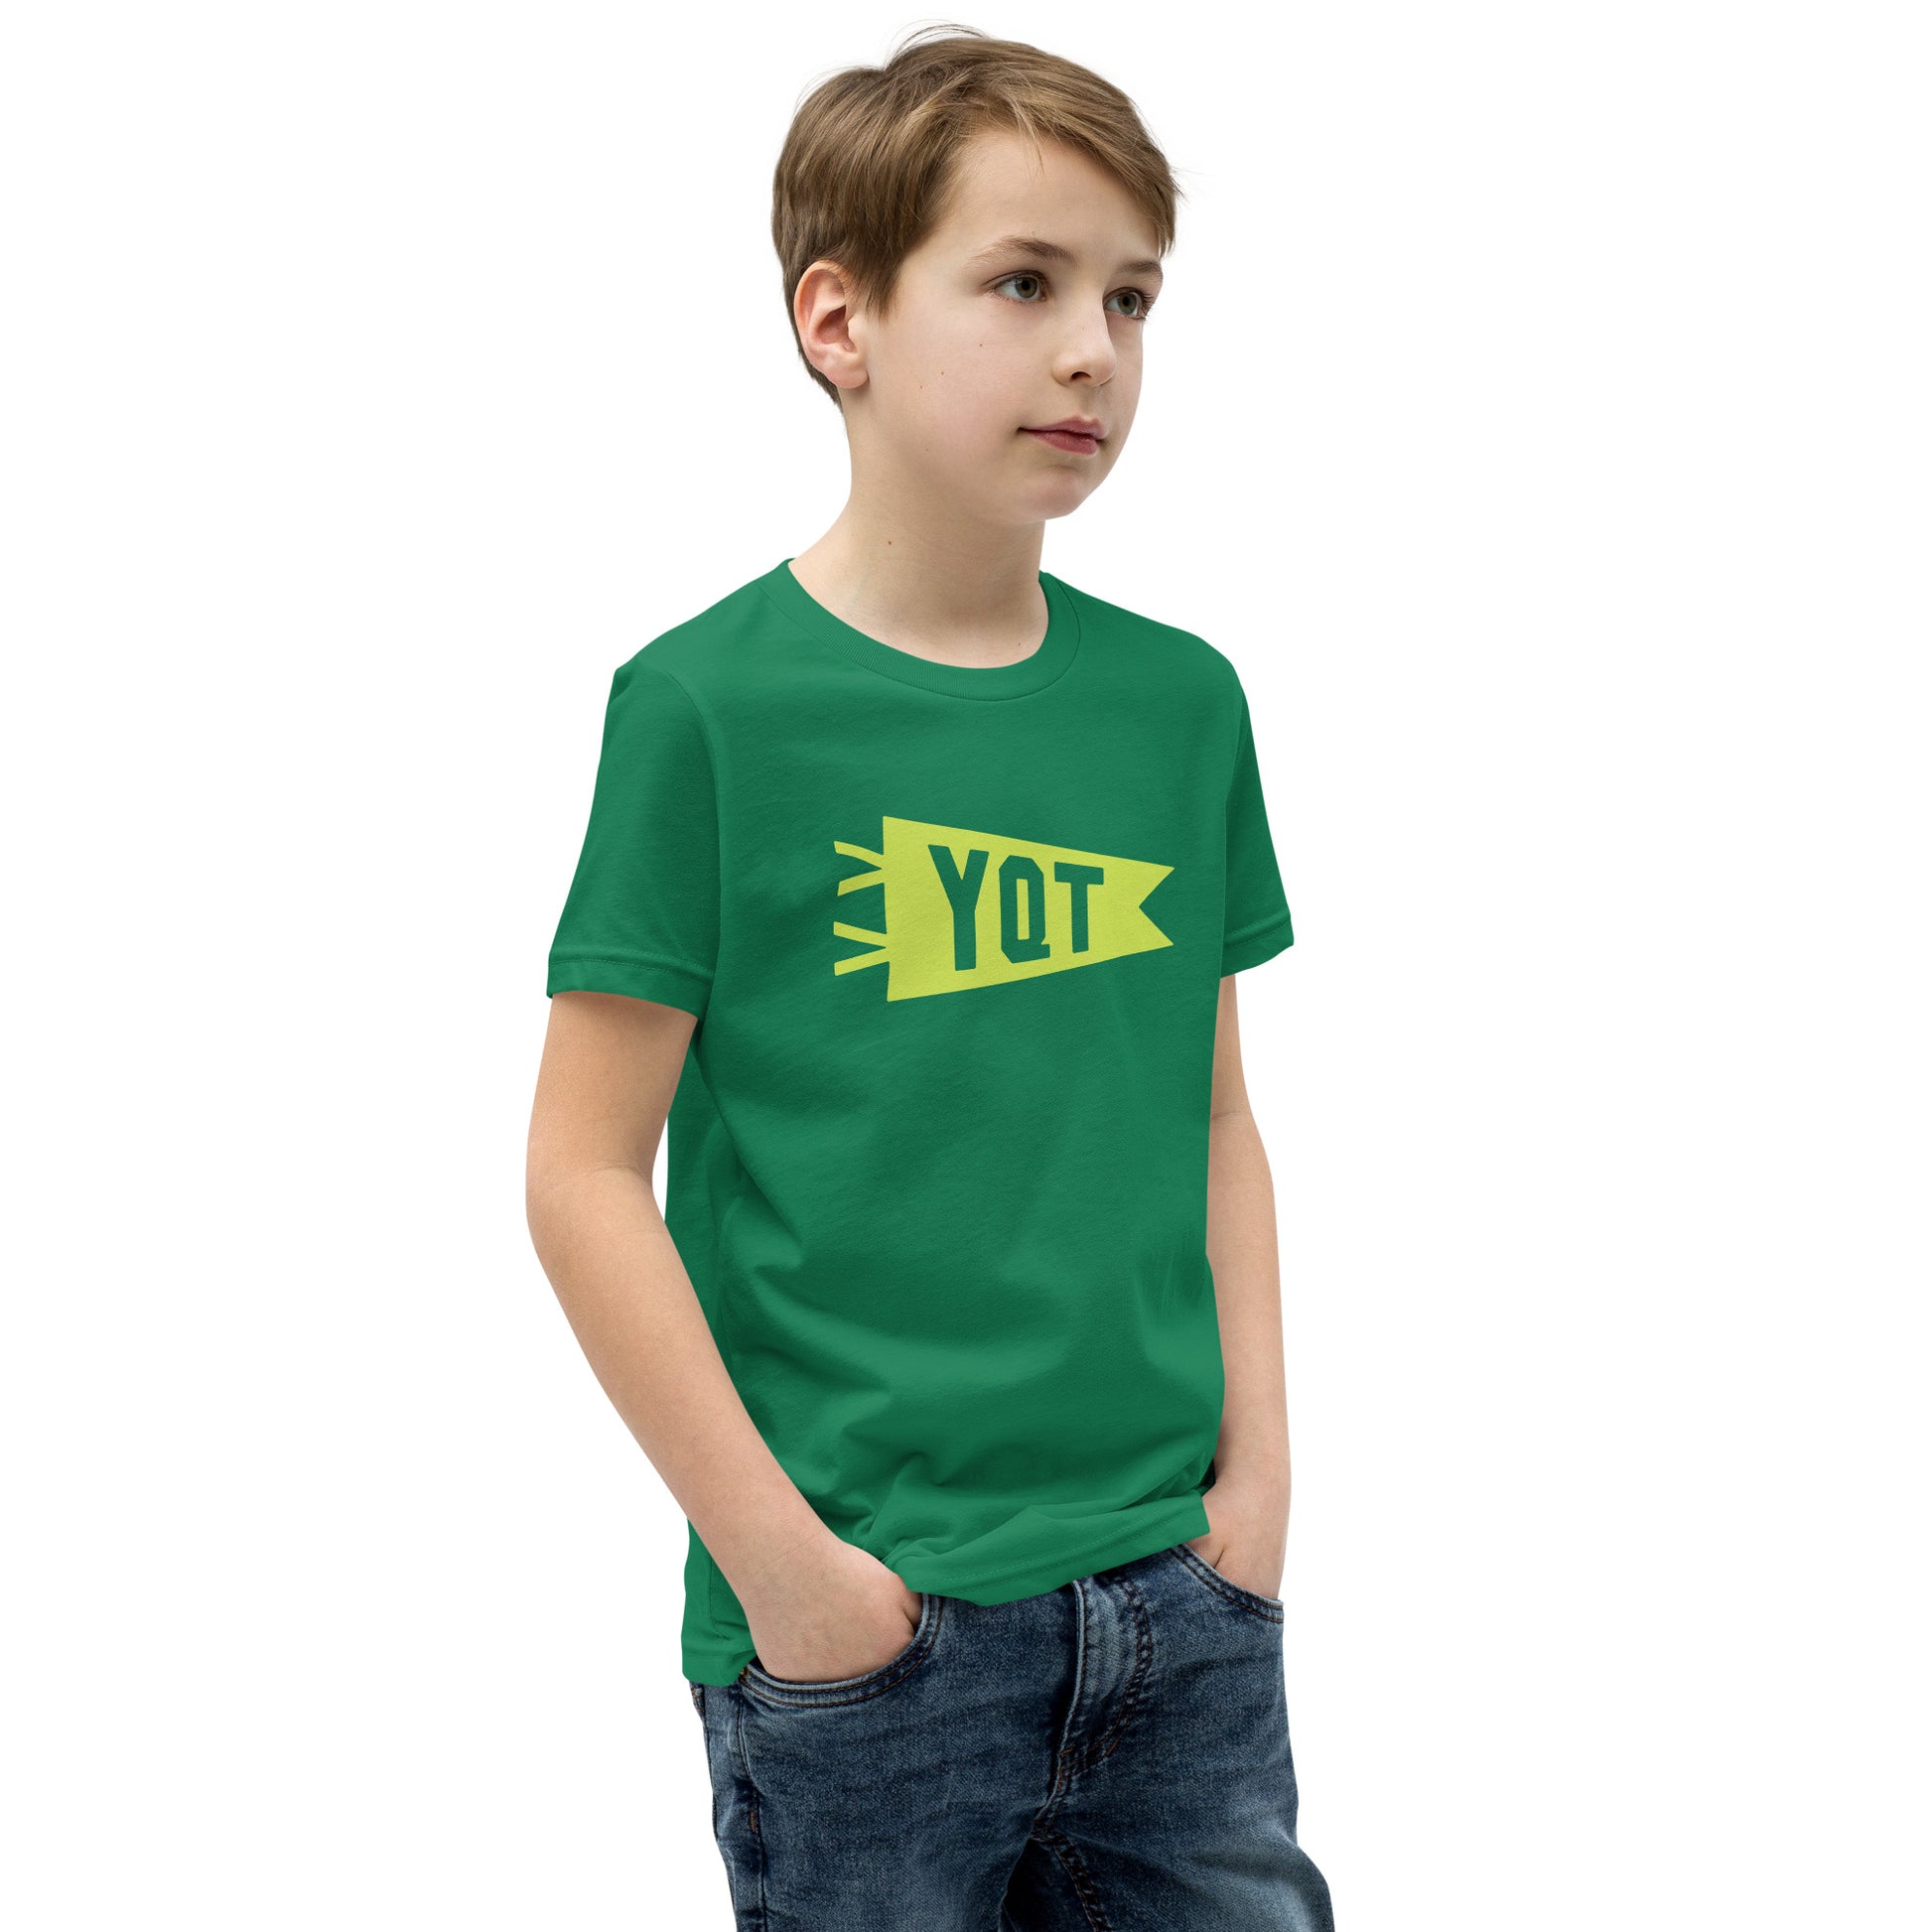 Kid's Airport Code Tee - Green Graphic • YQT Thunder Bay • YHM Designs - Image 07